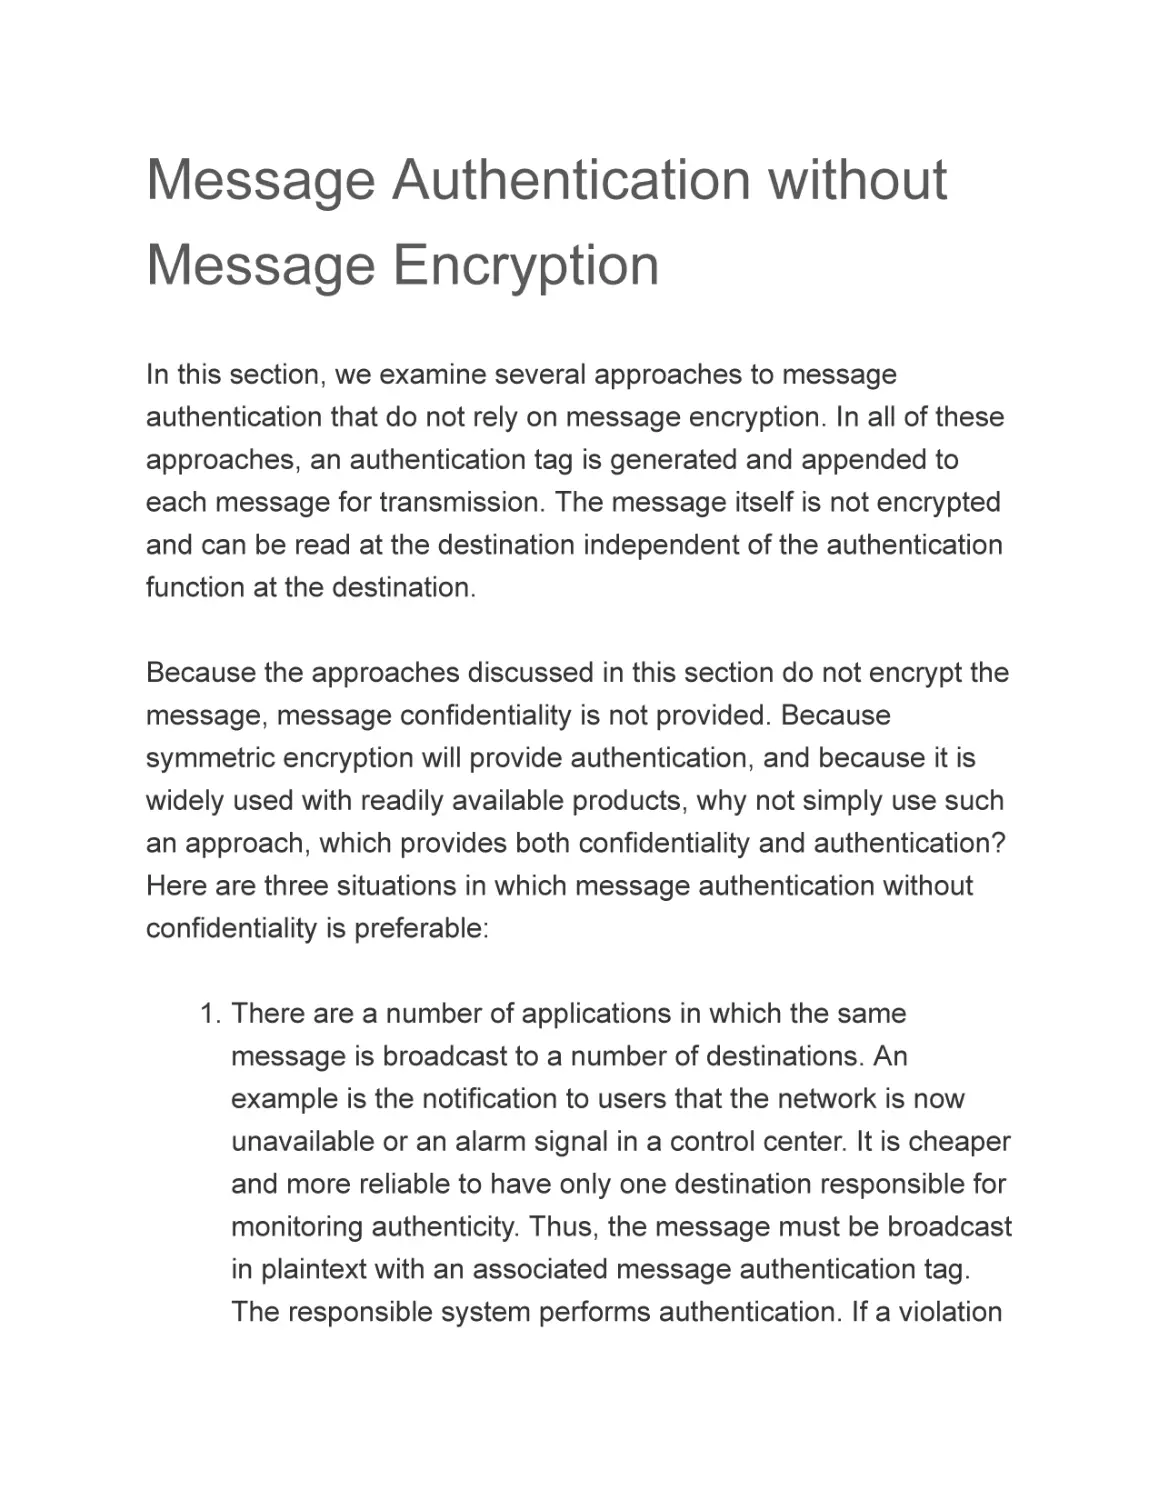 Message Authentication without Message Encryption